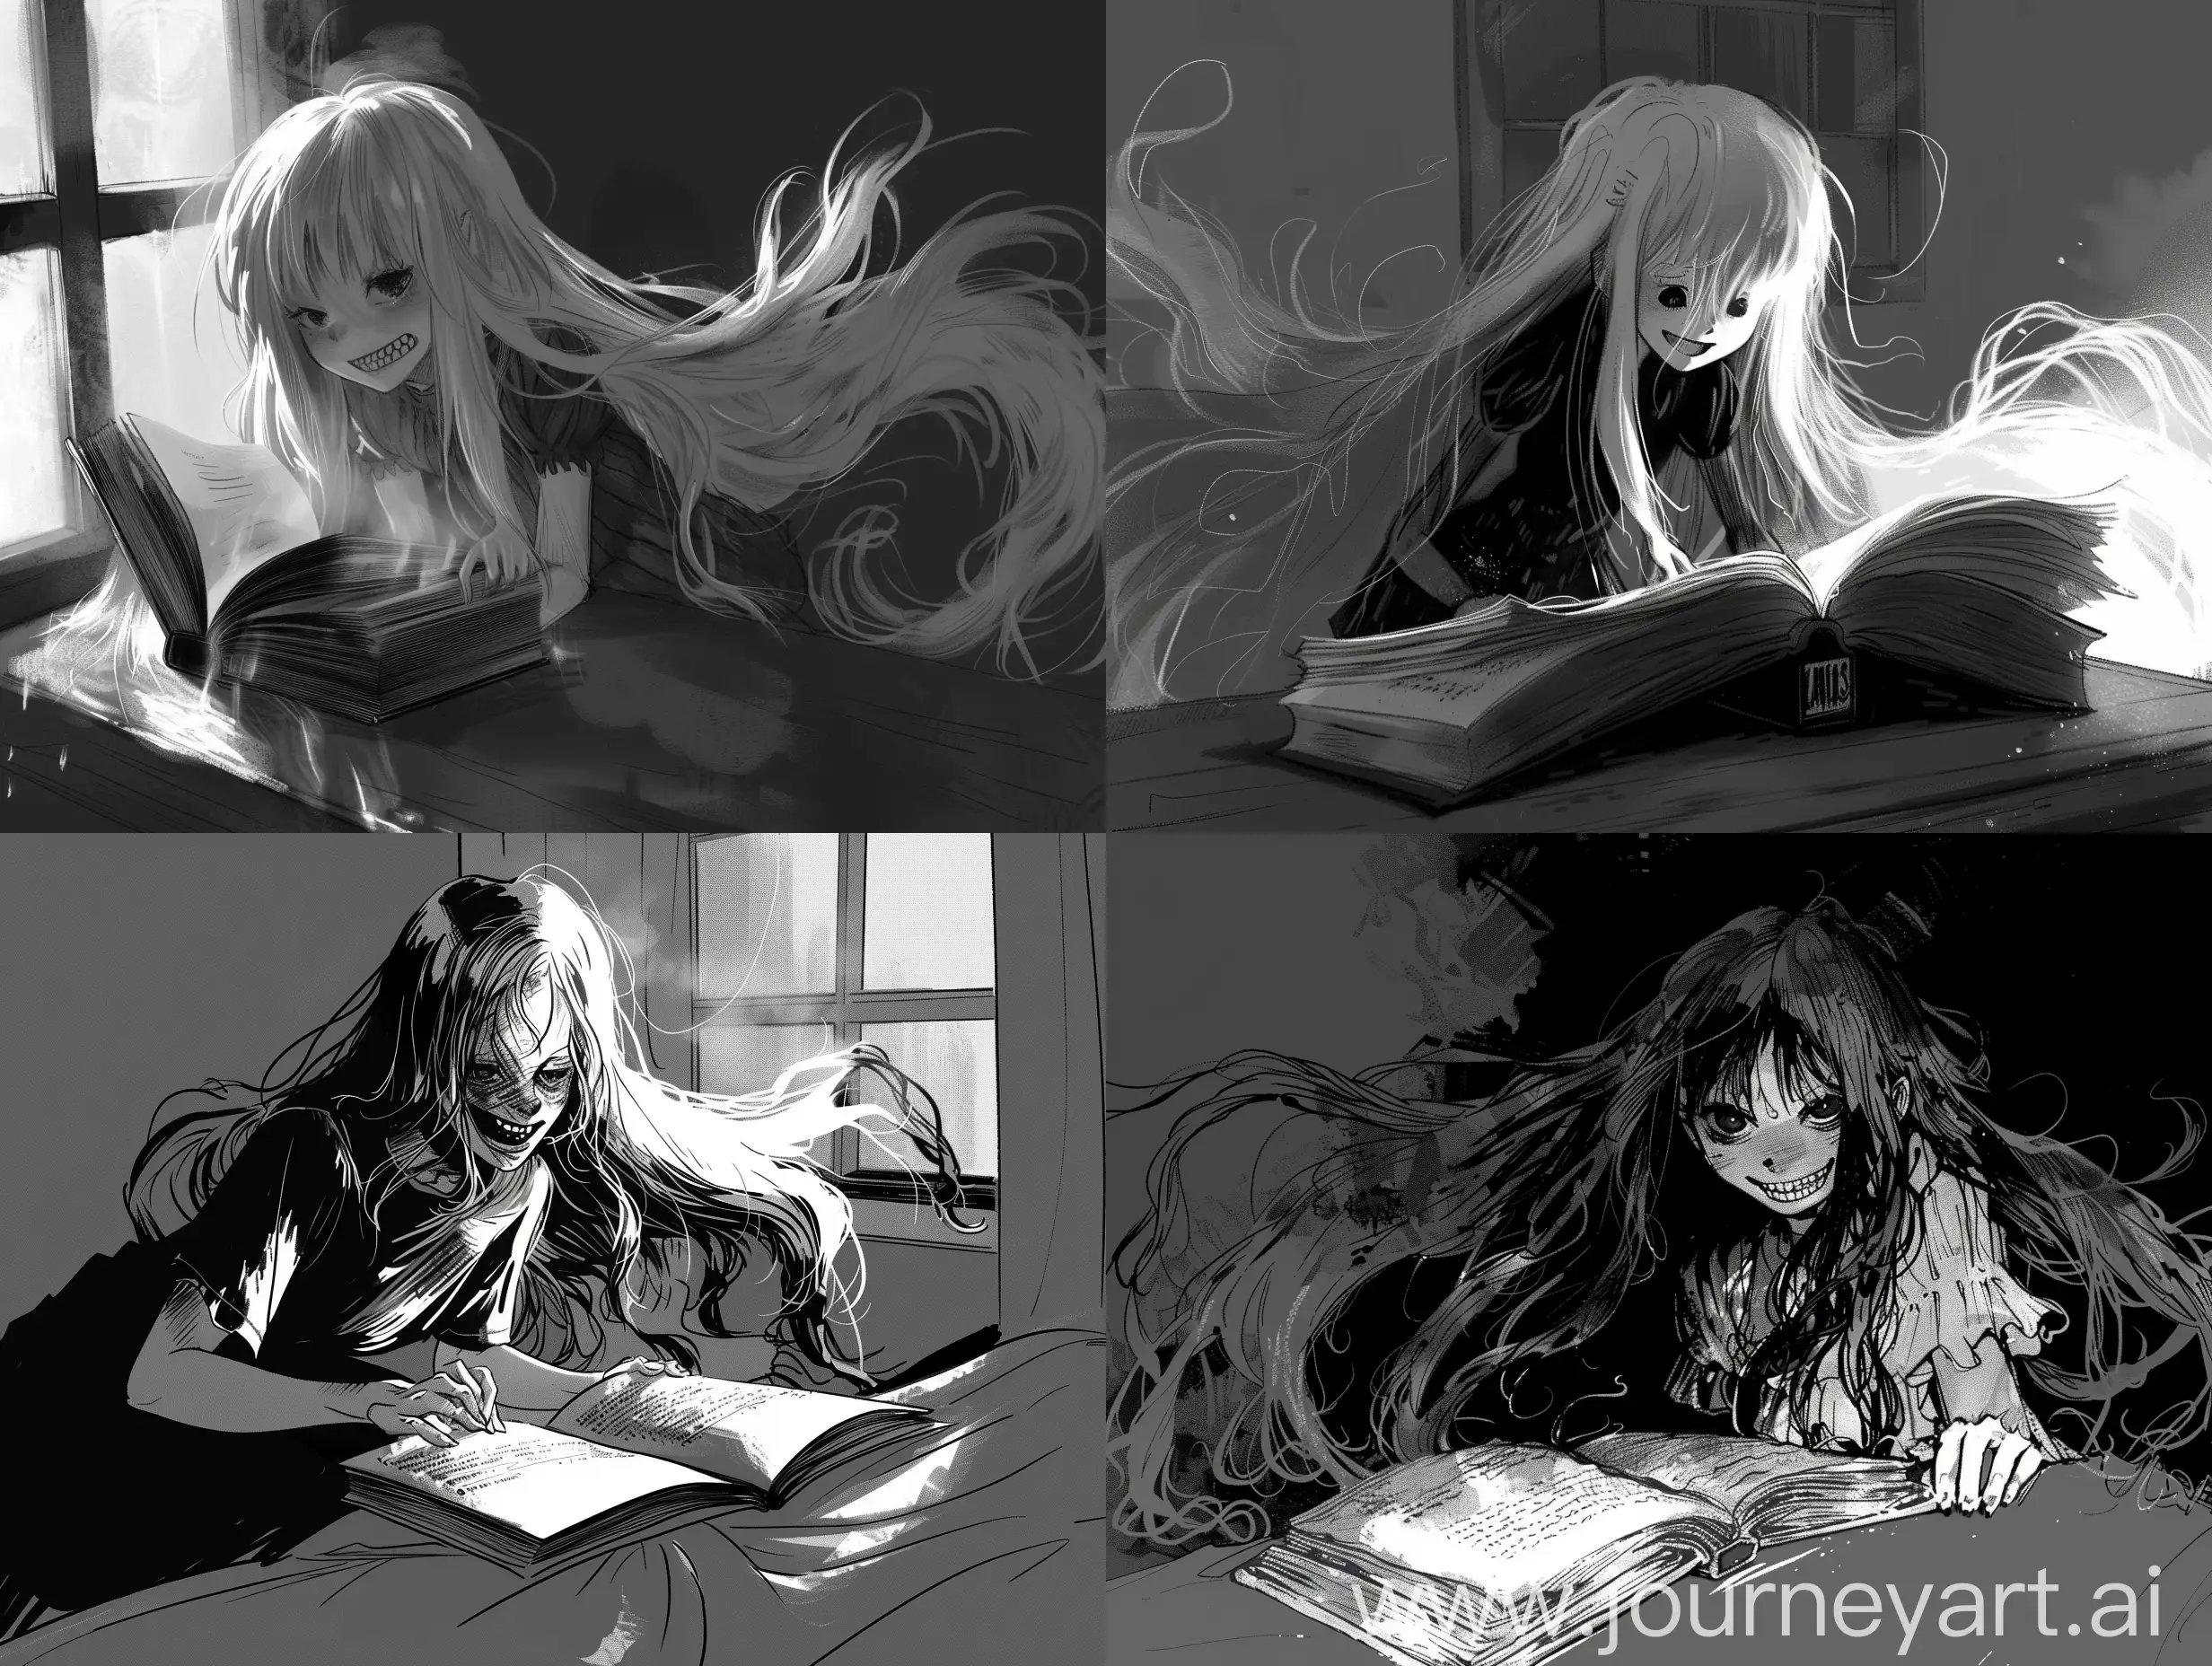 That's an indistinct creature, much like a wisp of mist, but clearly seen as a long-haired girl. She always appears in the student's room late at night, materializing behind them as they study. Leaning over to read the book, she reveals a terrifying smile.